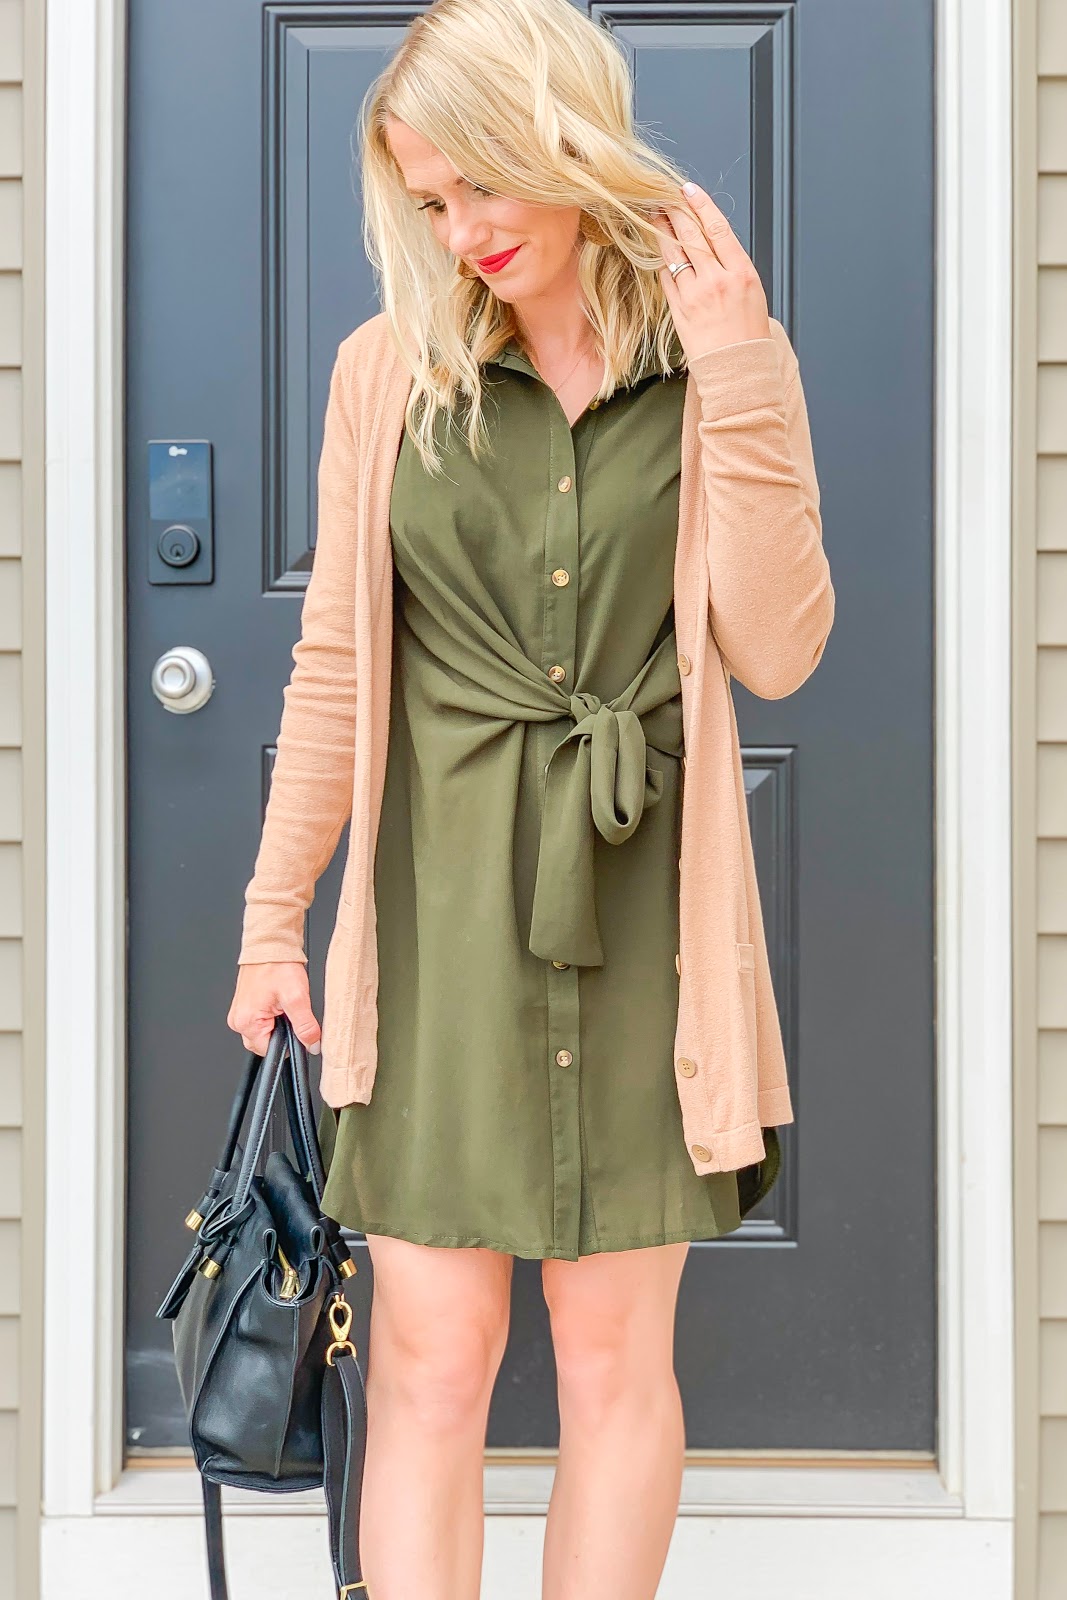 Green shirt dress from Amazon styled for fall